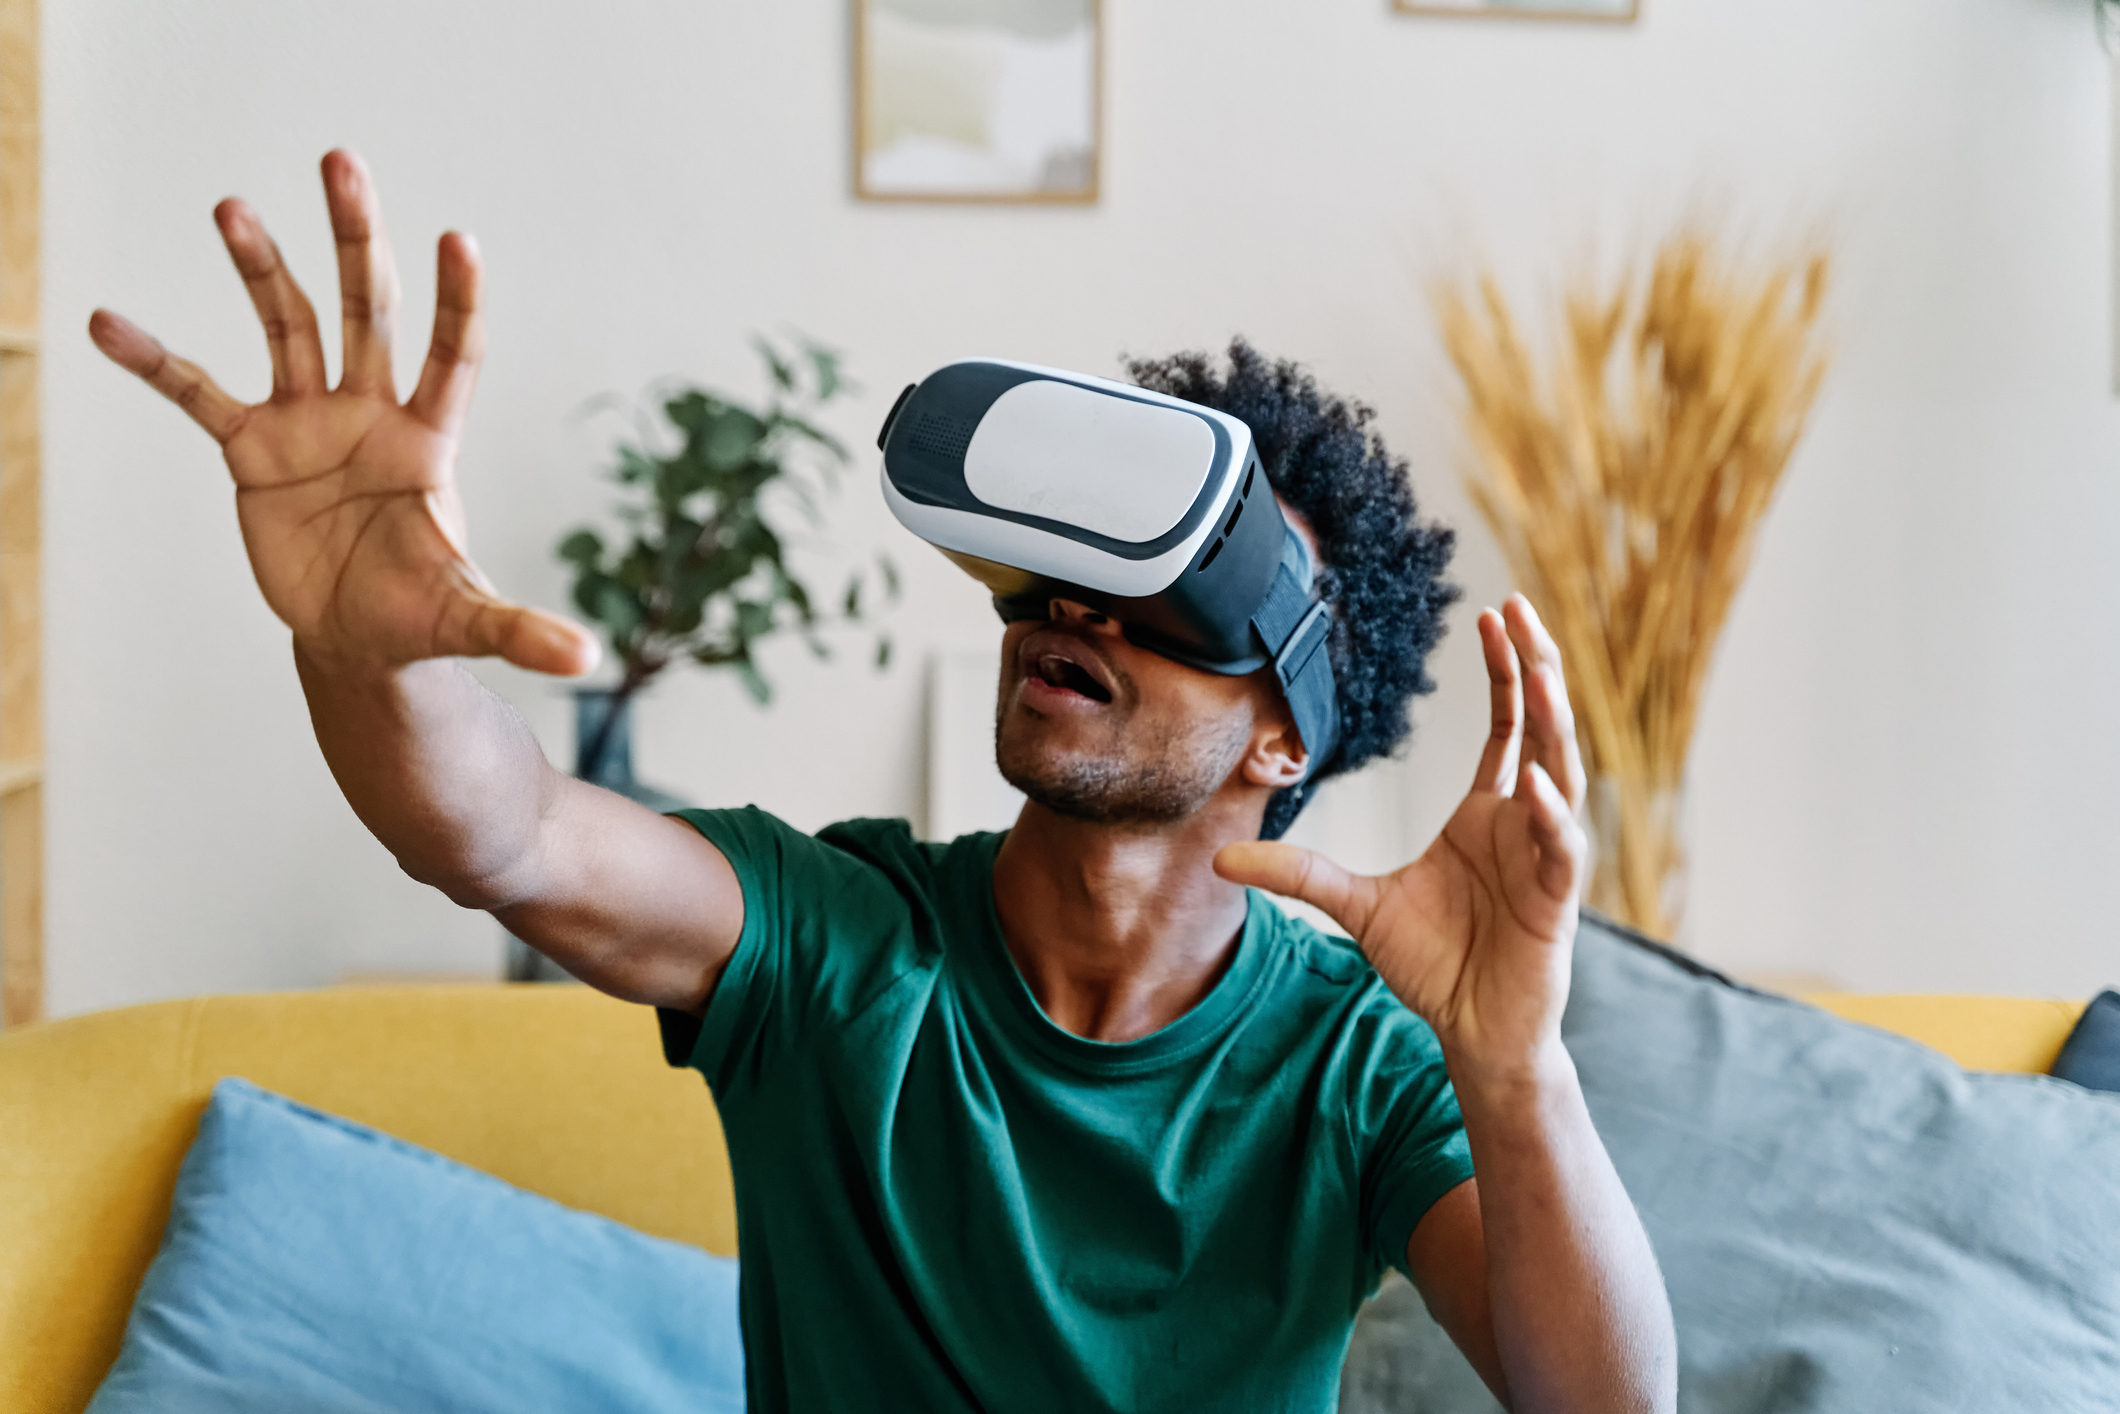 Person in a VR headset reaching out with hands, seated on a couch, seemingly immersed in a virtual experience